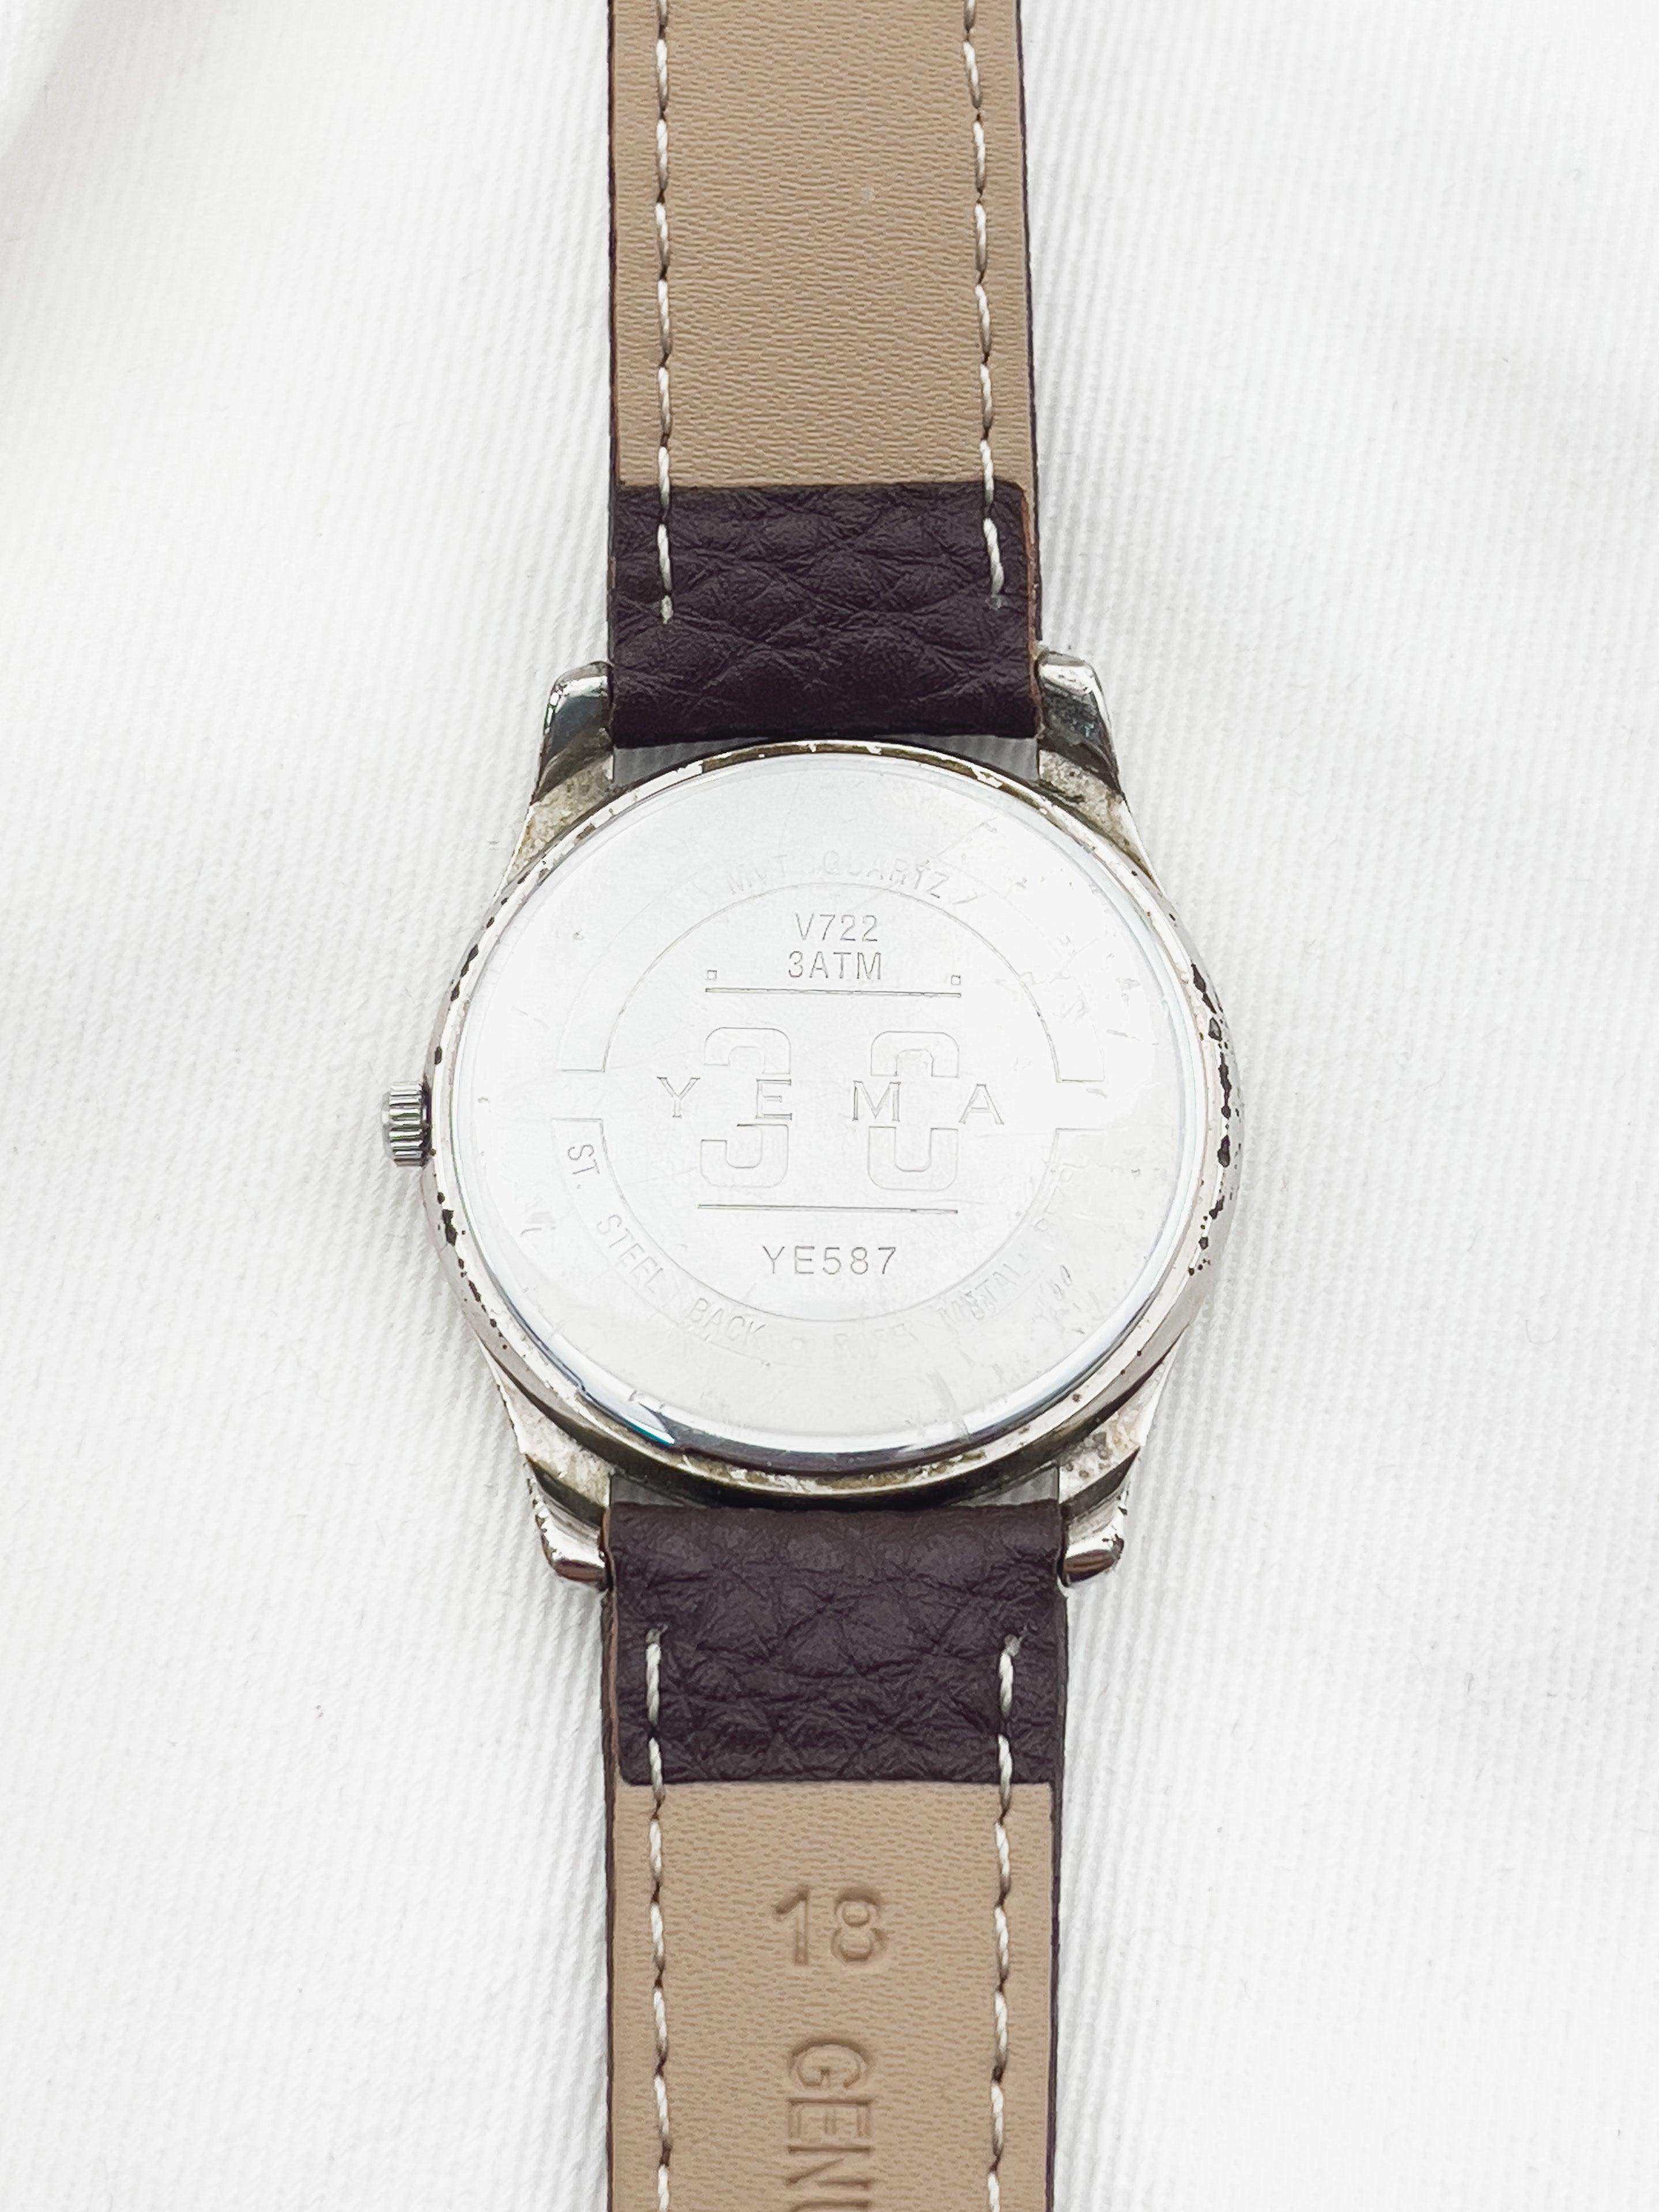 Yema - White Dial Date - 1990's - Atelier Victor